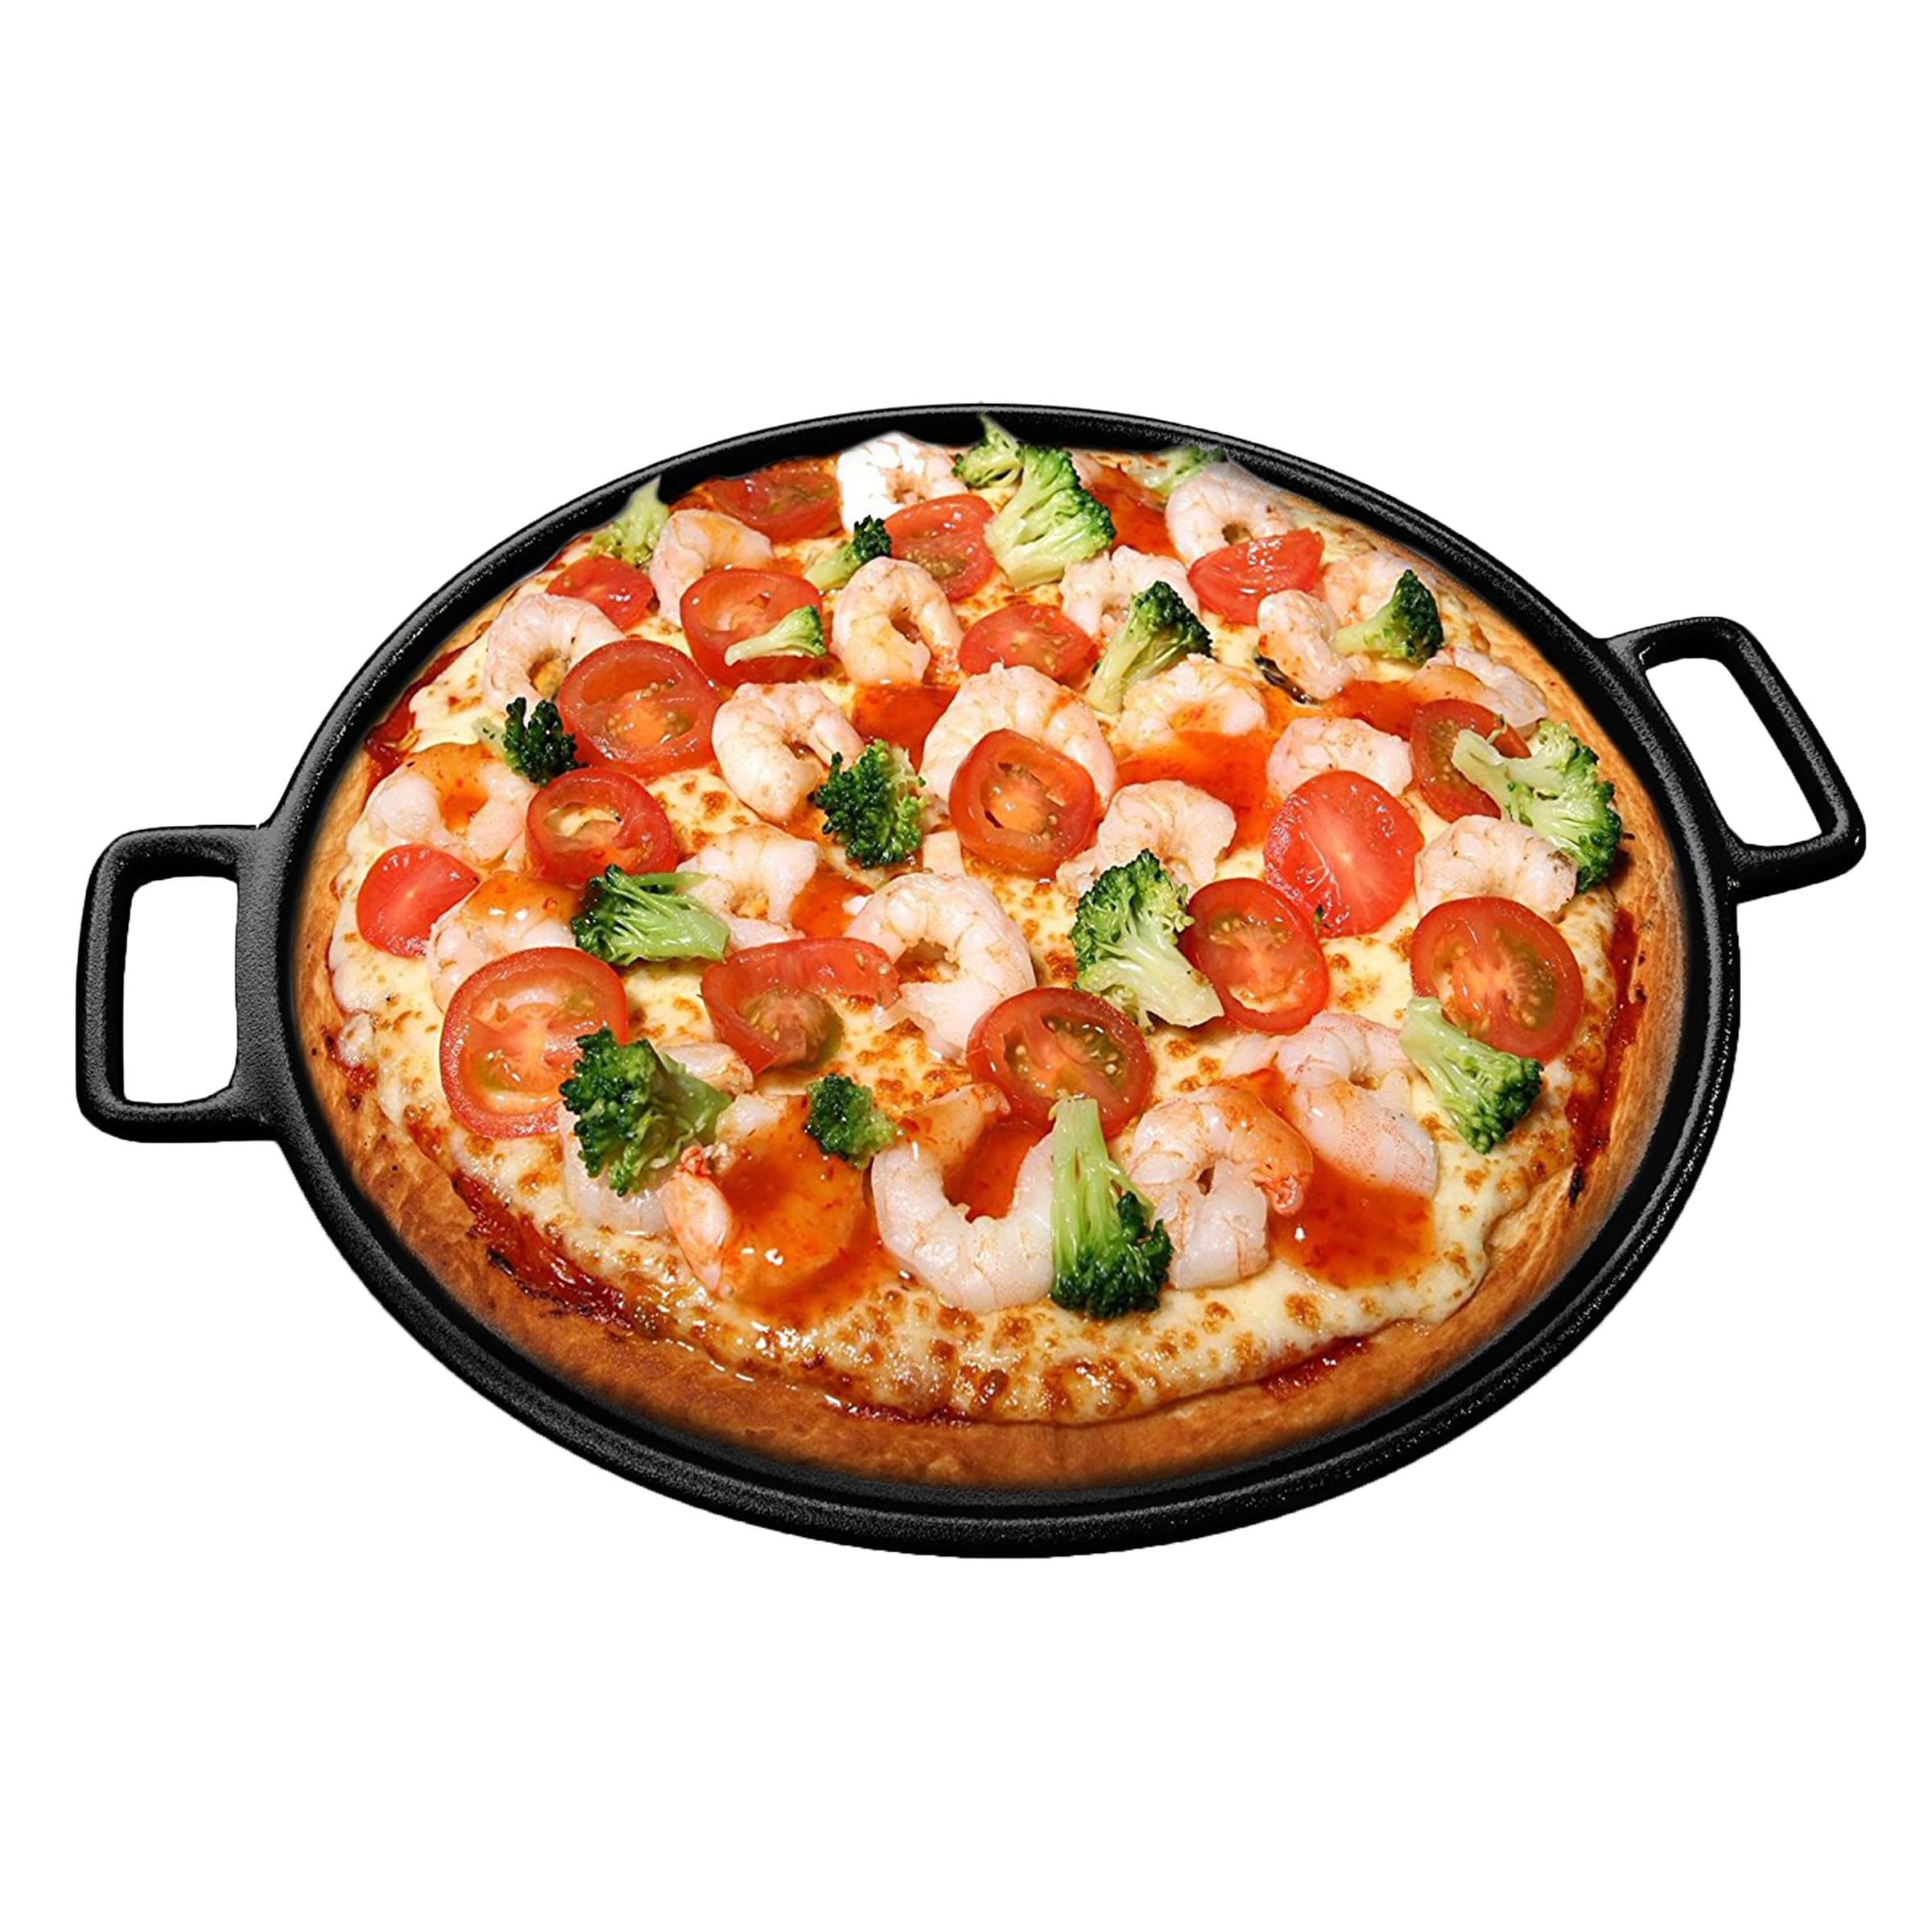 Cast Iron Pizza Pan-13.25 Inches Pre-Seasoned Skillet for Cooking, Baking,  Grilling-Durable, Long Lasting by Classic Cuisine - Bed Bath & Beyond -  22897374